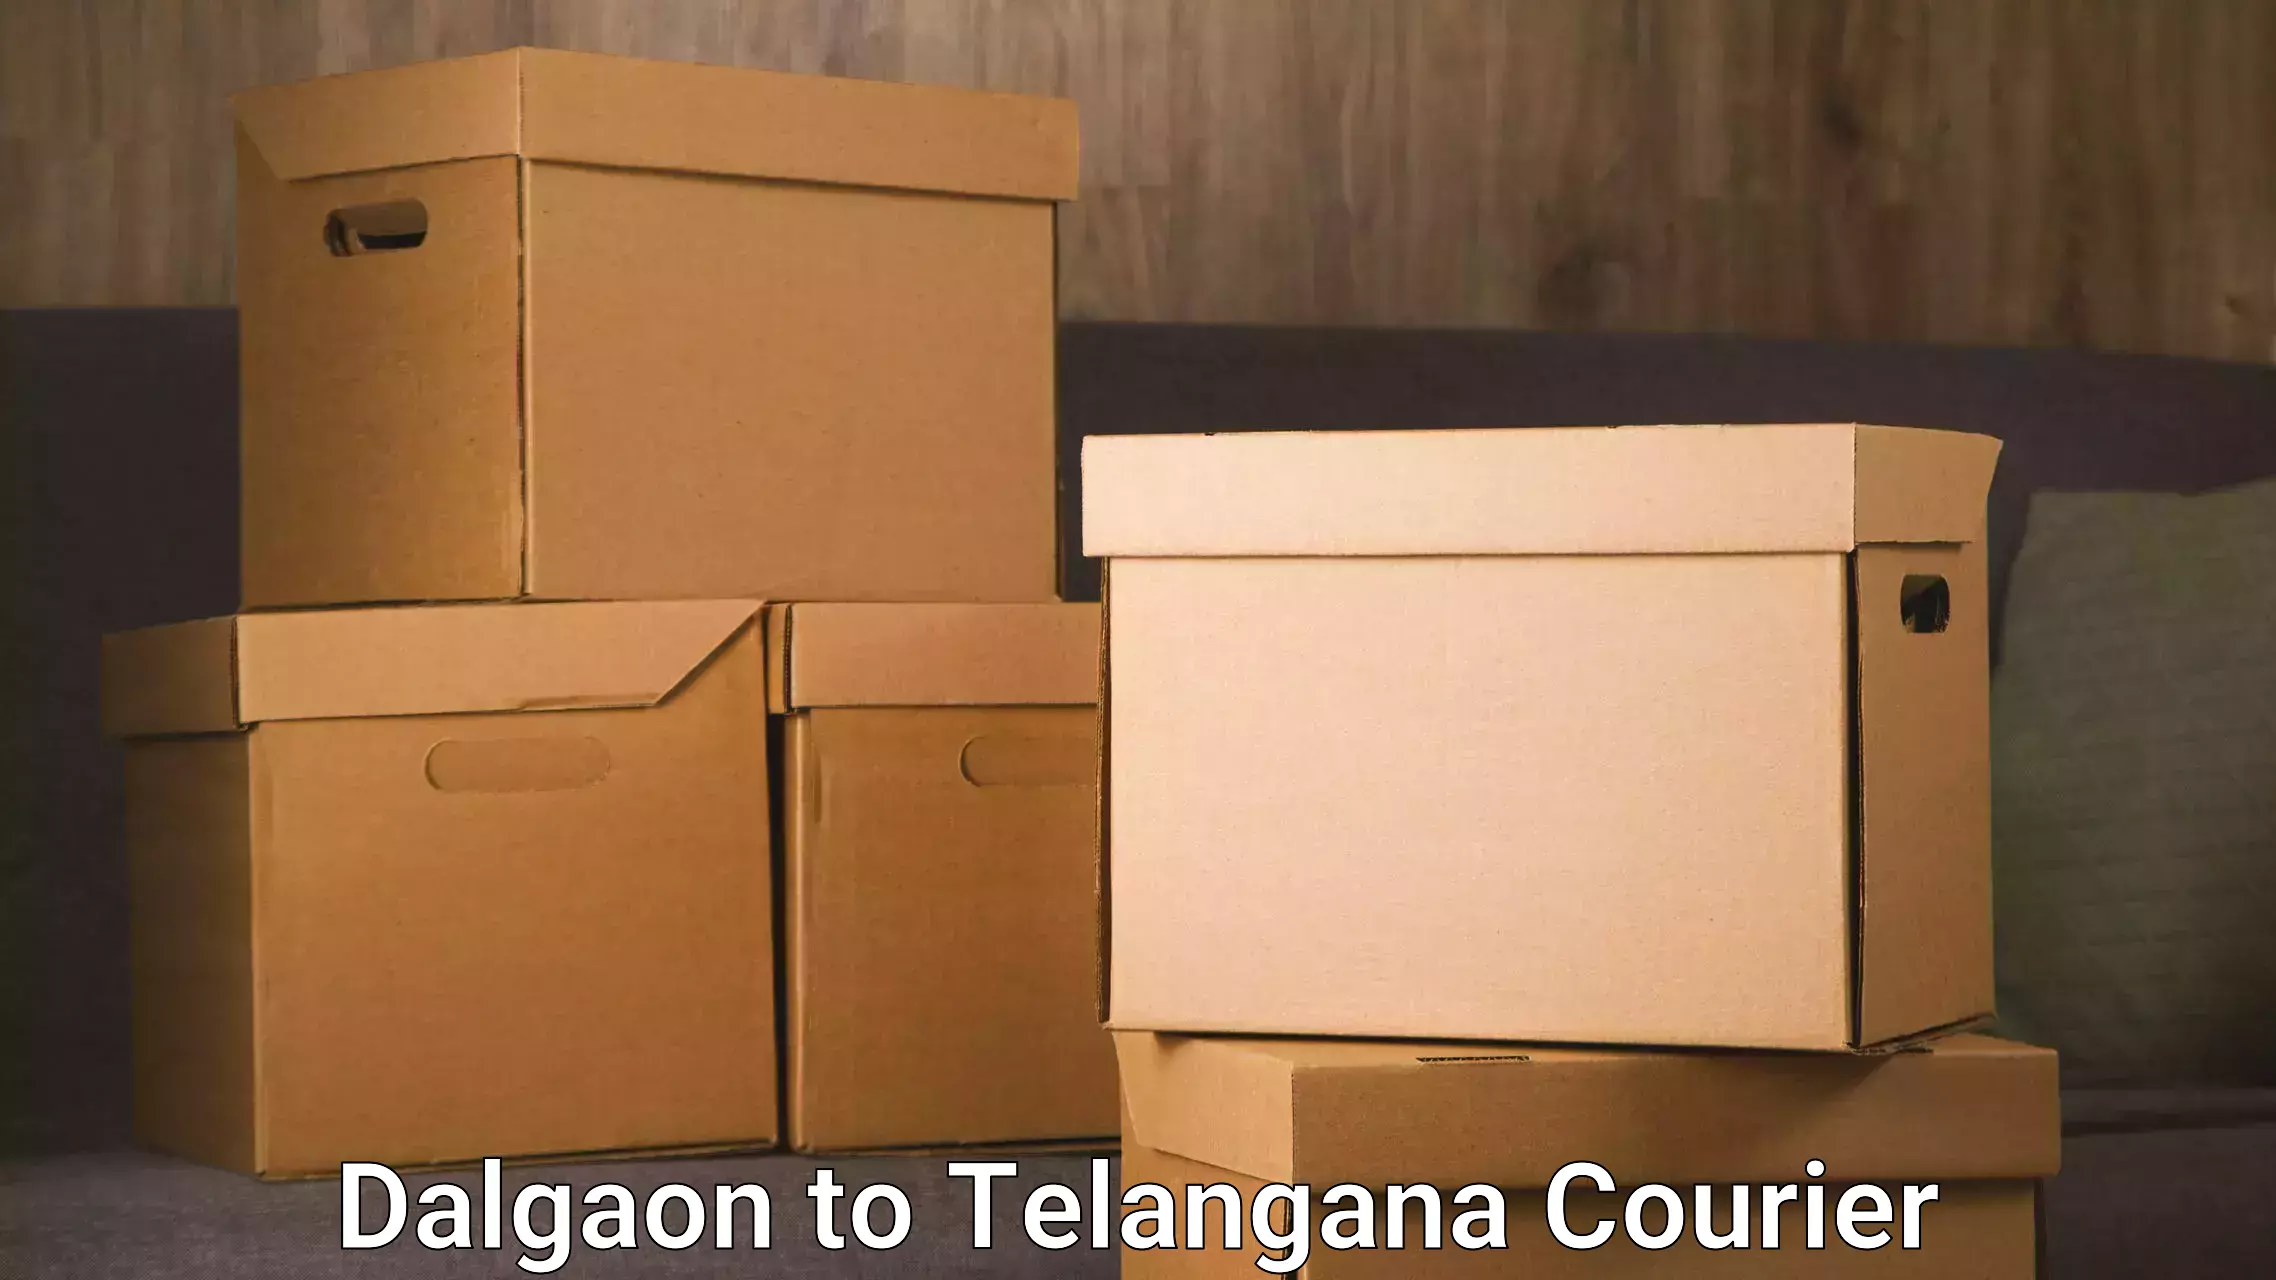 Affordable parcel service Dalgaon to Hyderabad